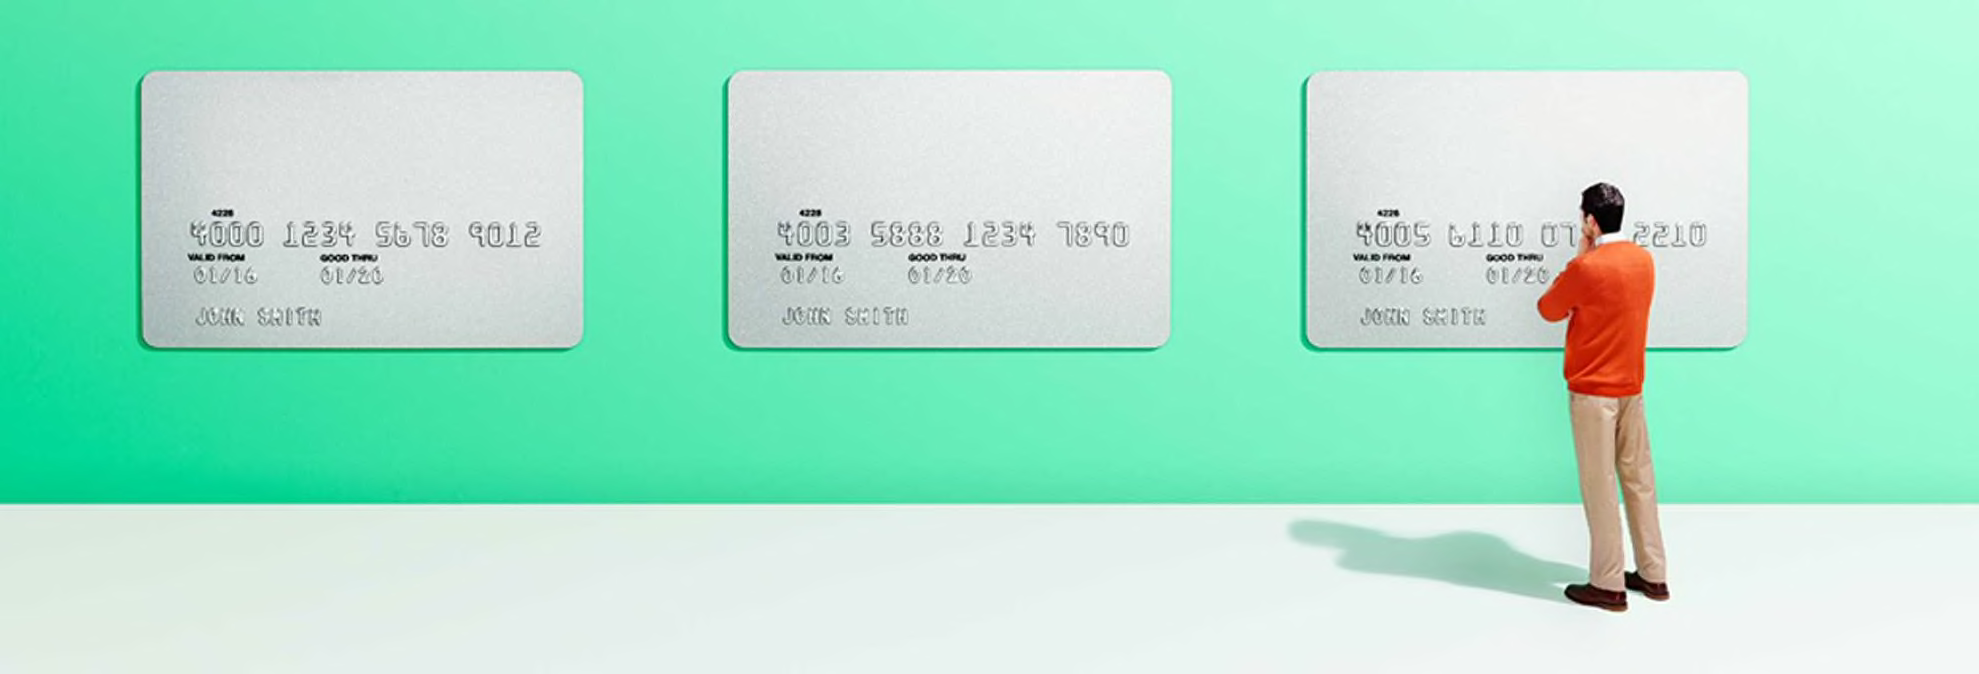 Credit Card Buying Guide